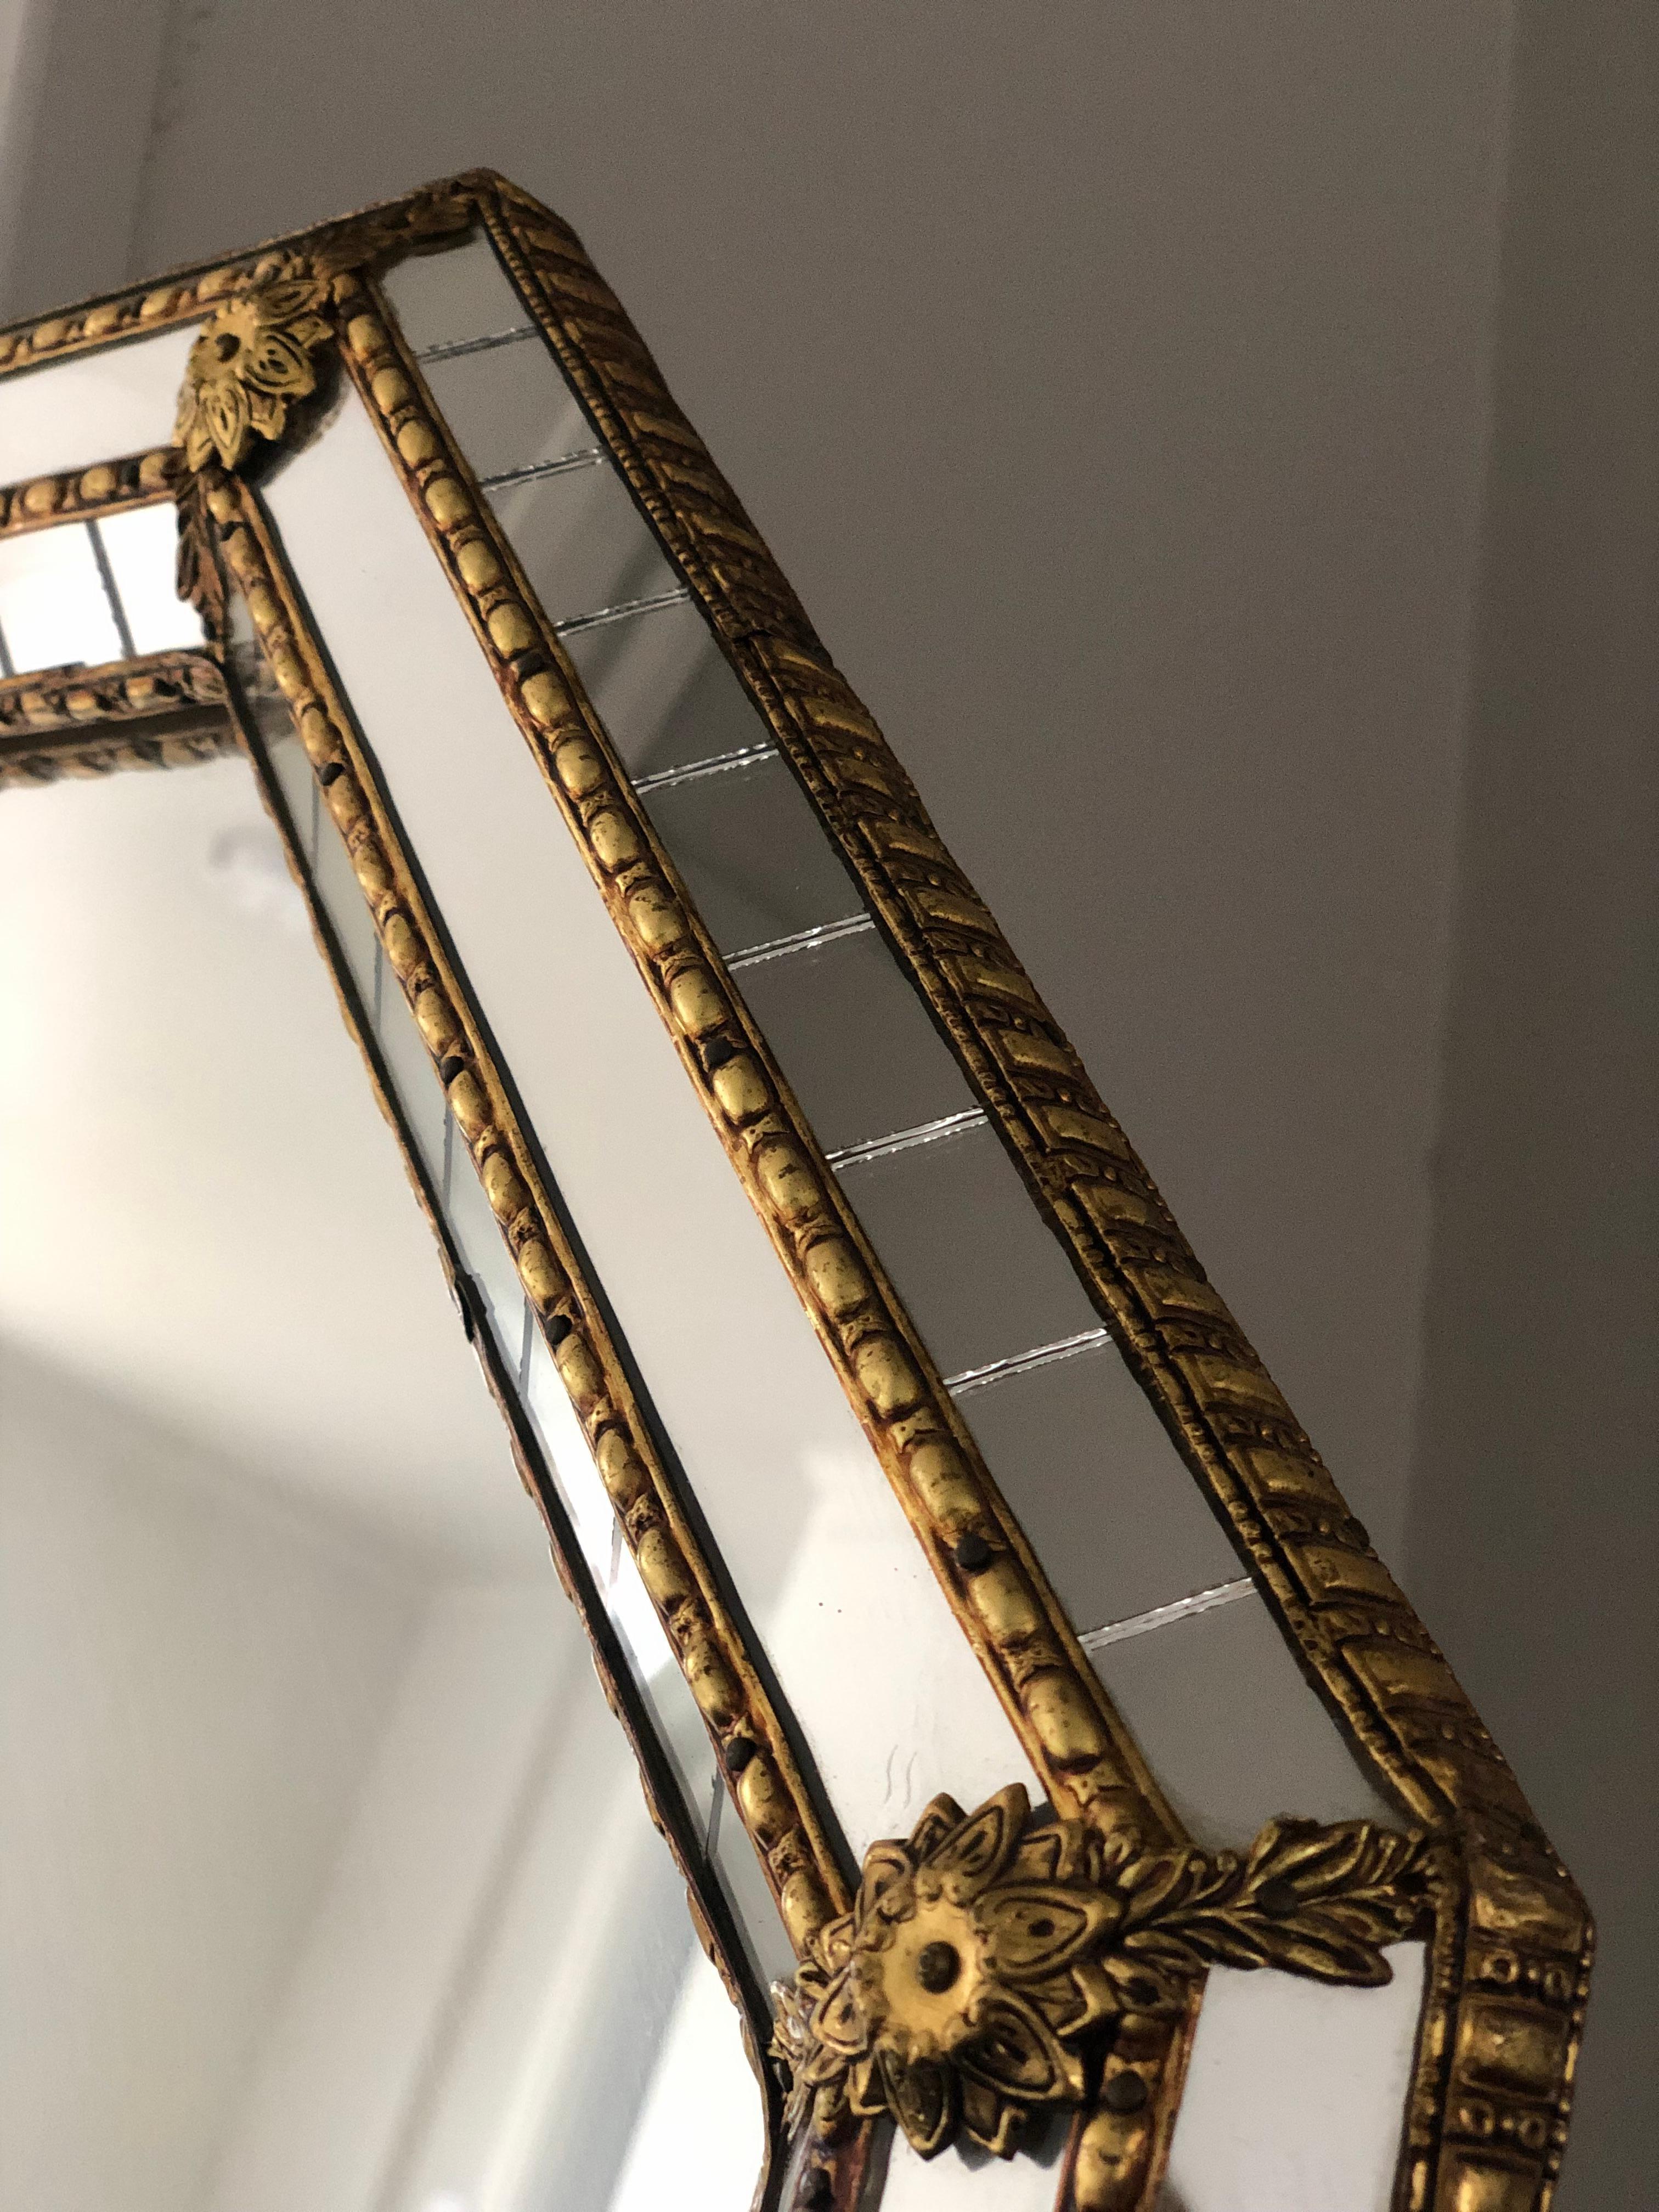 Beautiful Spanish octagonal mirror with a Venetian glass frame with a brass golden strip. The frame is made with small crystals both on the outside and inside, and larger ones in the center line. The brass strip holds the mirrors together.

Handmade